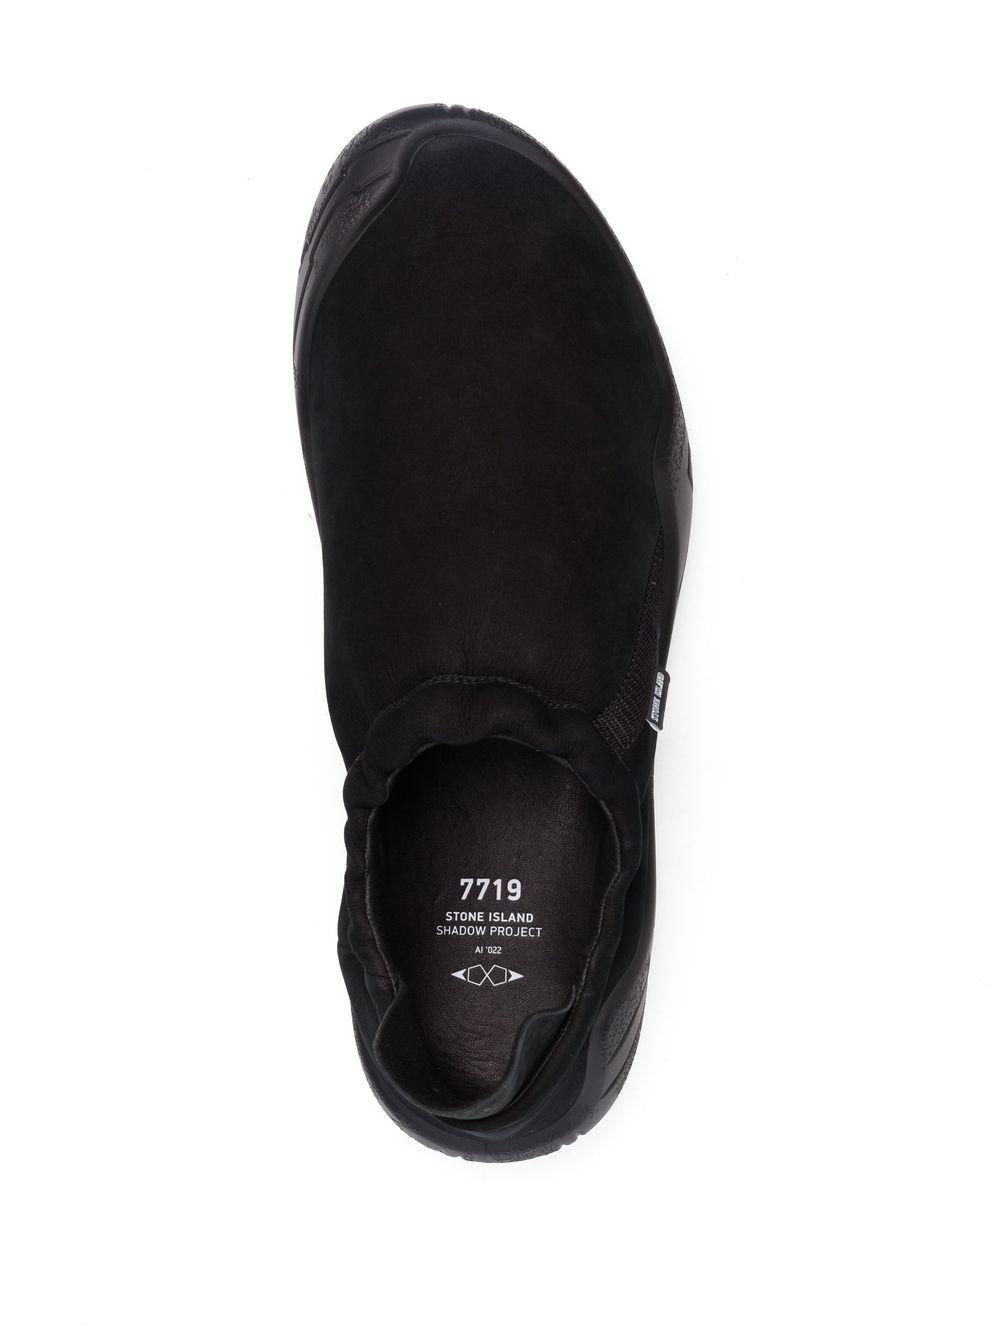 Stone Island Shadow Project Slip-on Suede Sneakers in Black for Men | Lyst